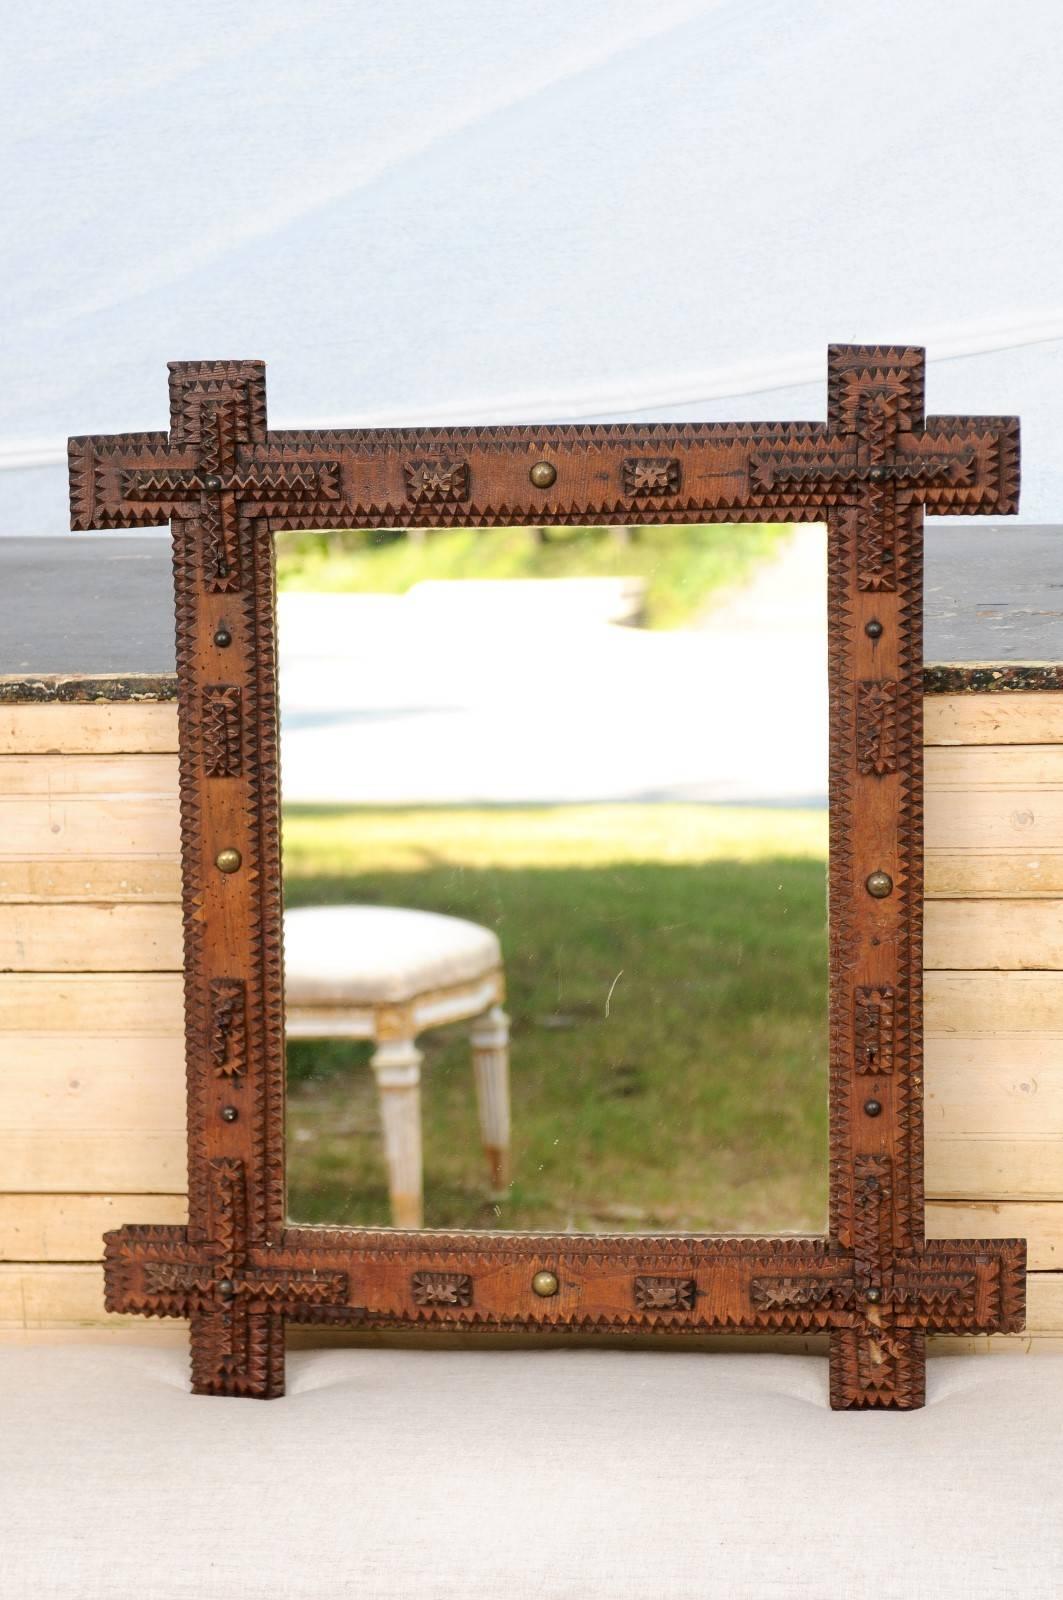 This French small size Tramp Art mirror from the turn of the century (19th to 20th) features a carved linear frame, typical of the Tramp Art style. Made of textured and layered grooves, the four corners are accentuated with additional motifs,